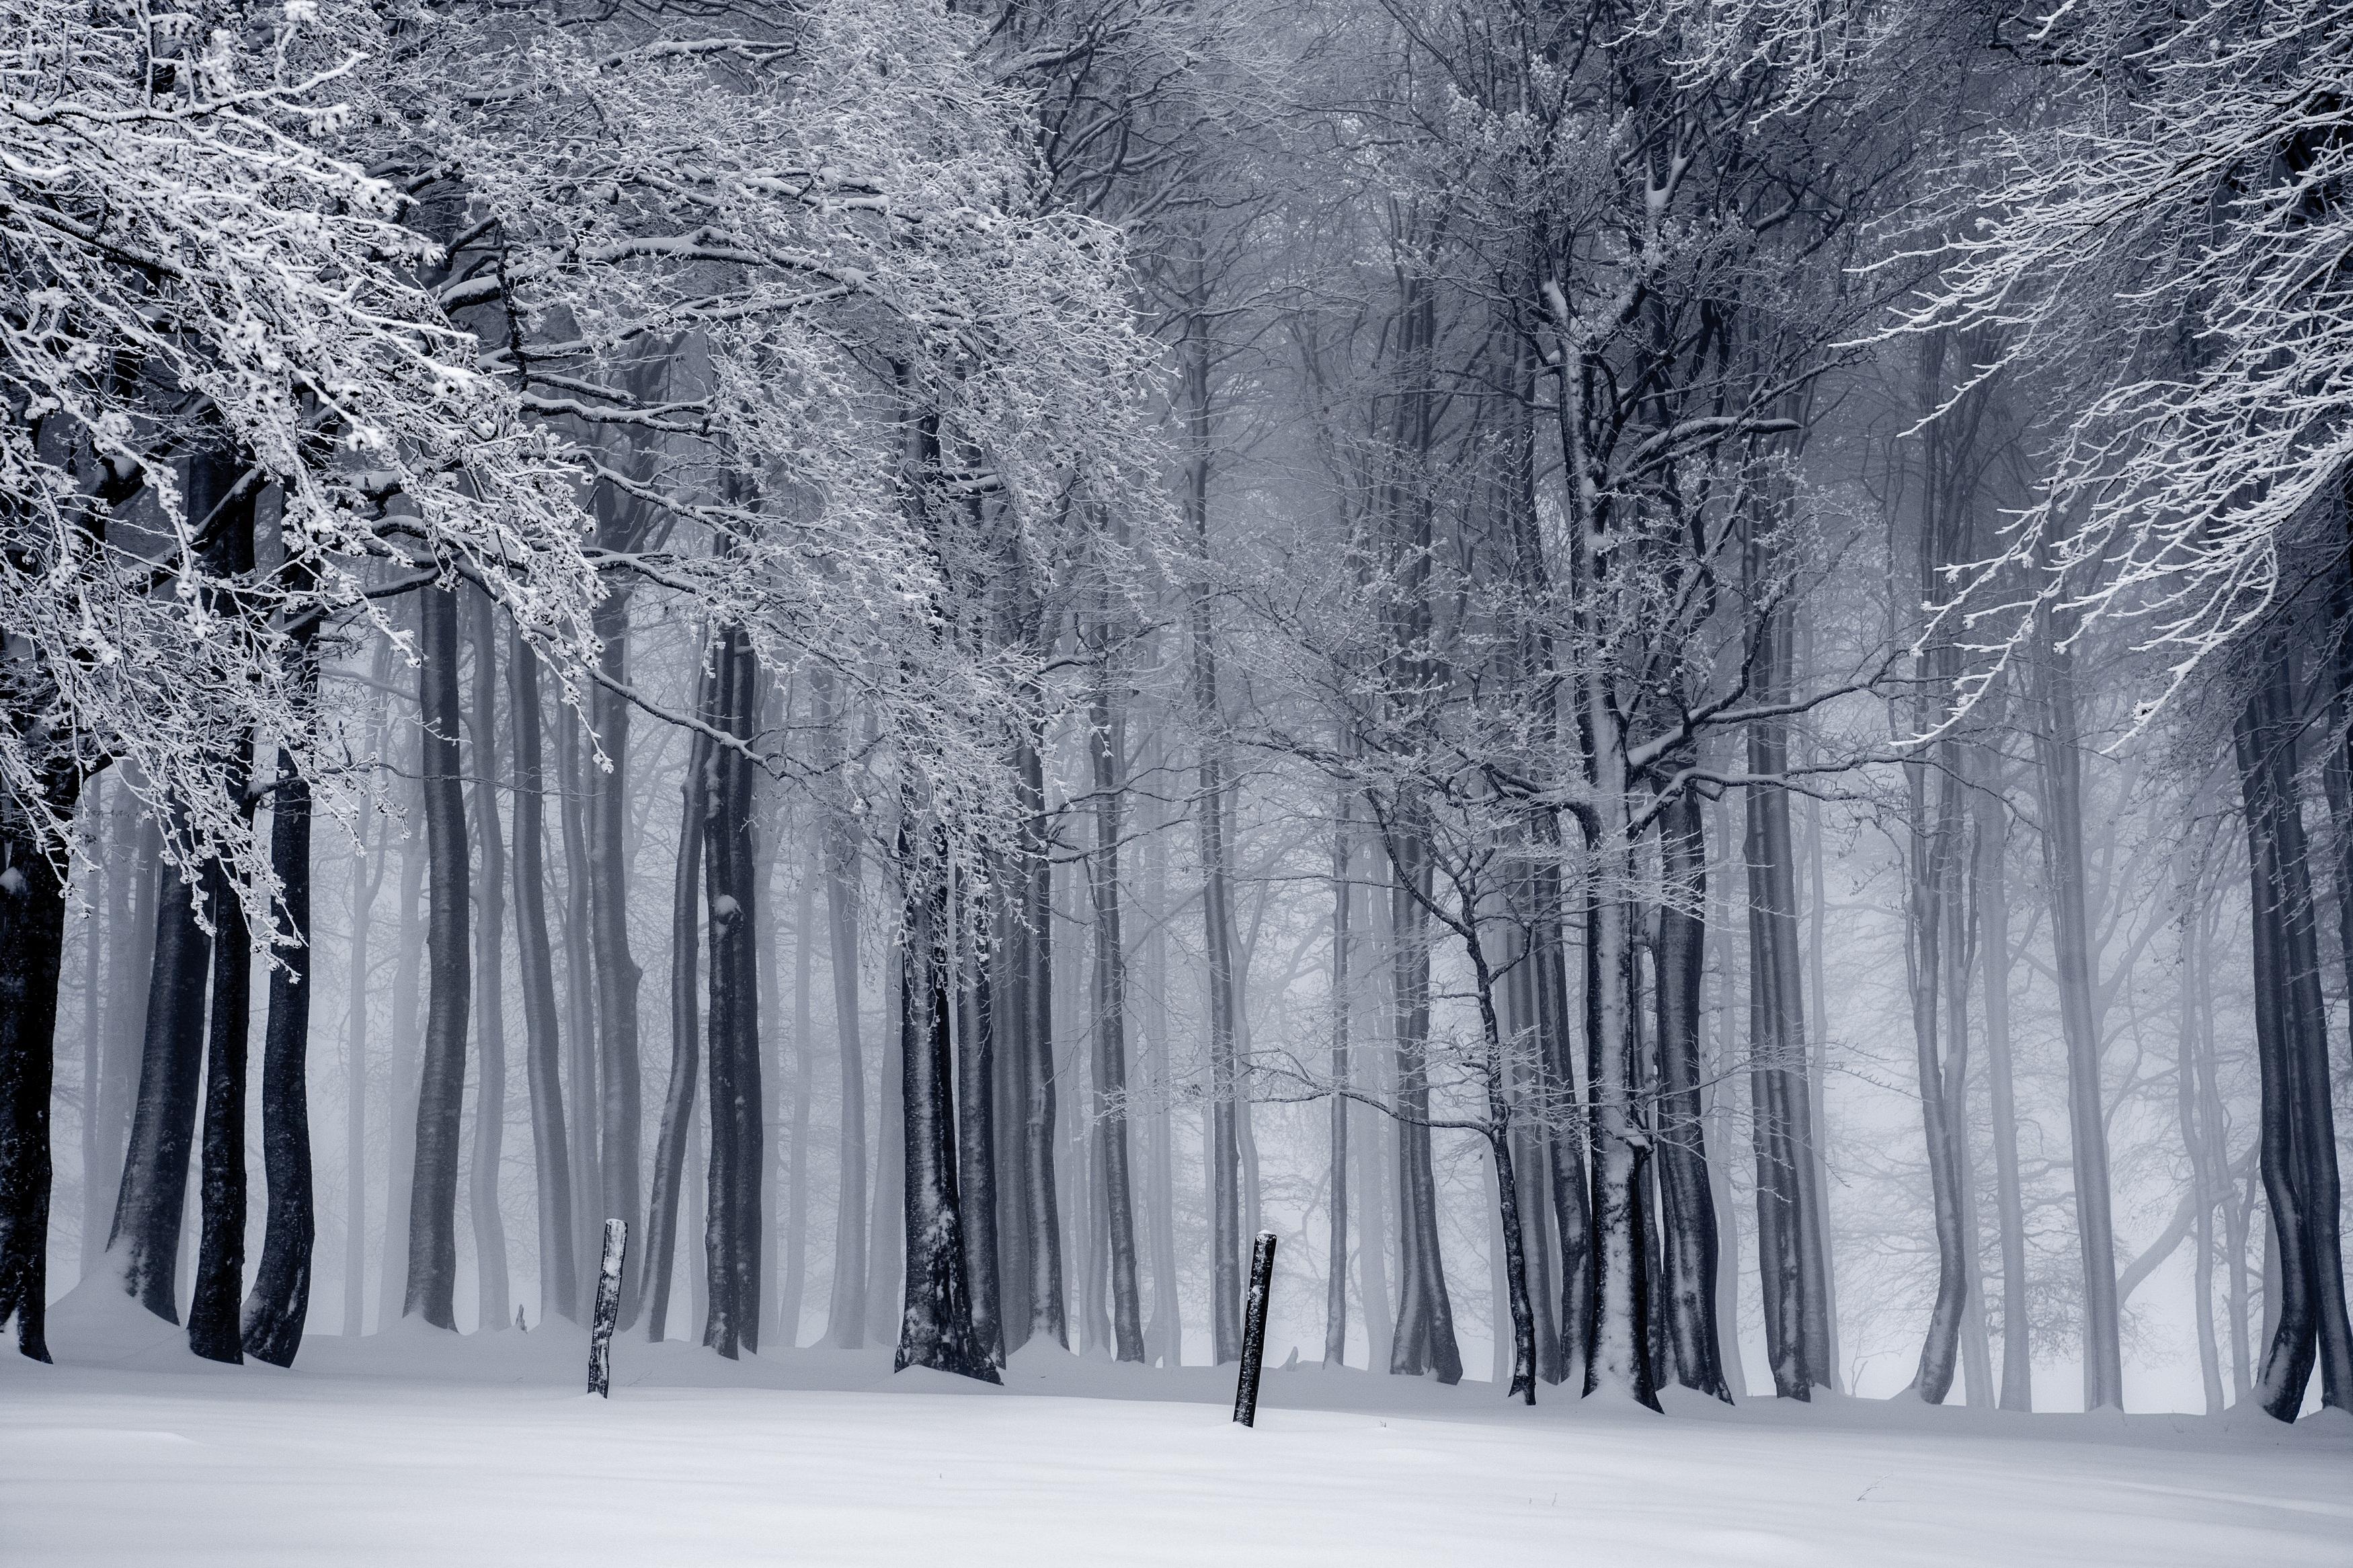 Black And White Cold Fog Image. Free Stock Image